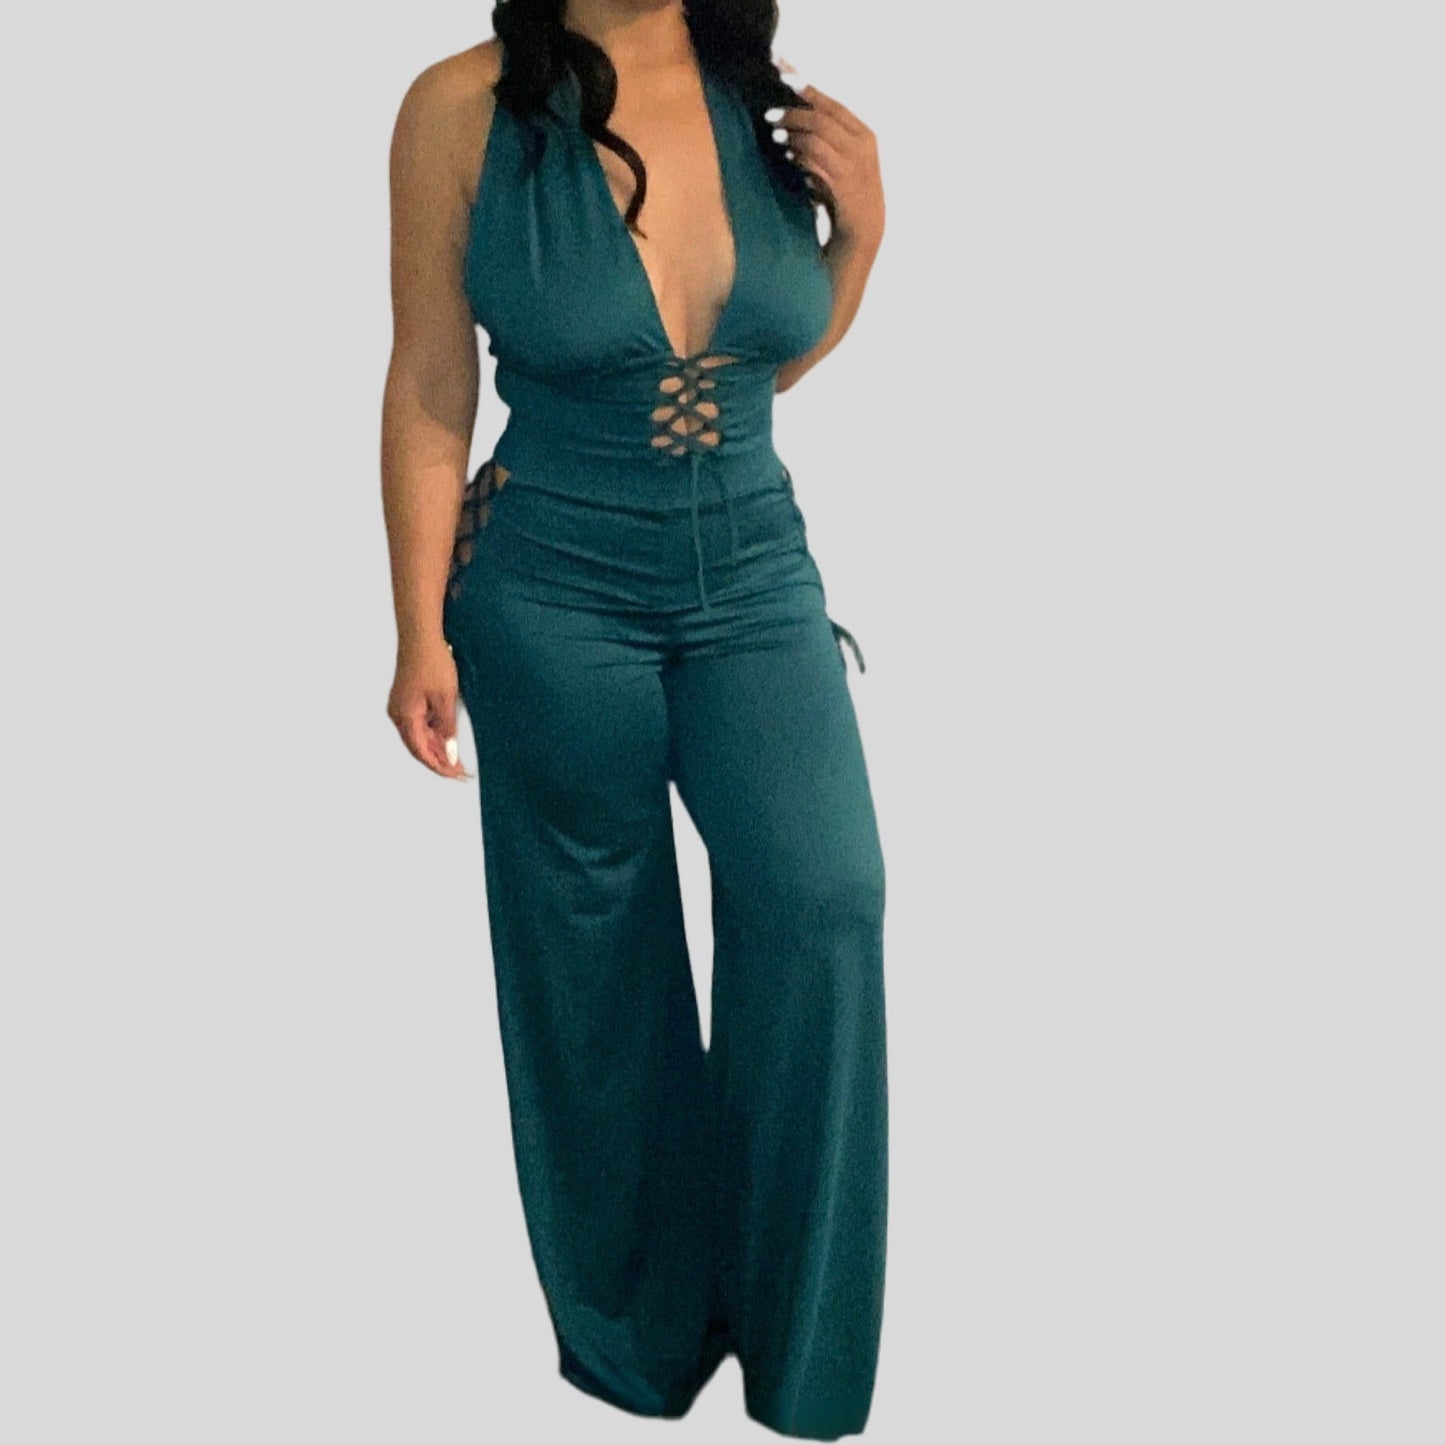 Loving Me GREEN 2 Pc. Set Collection